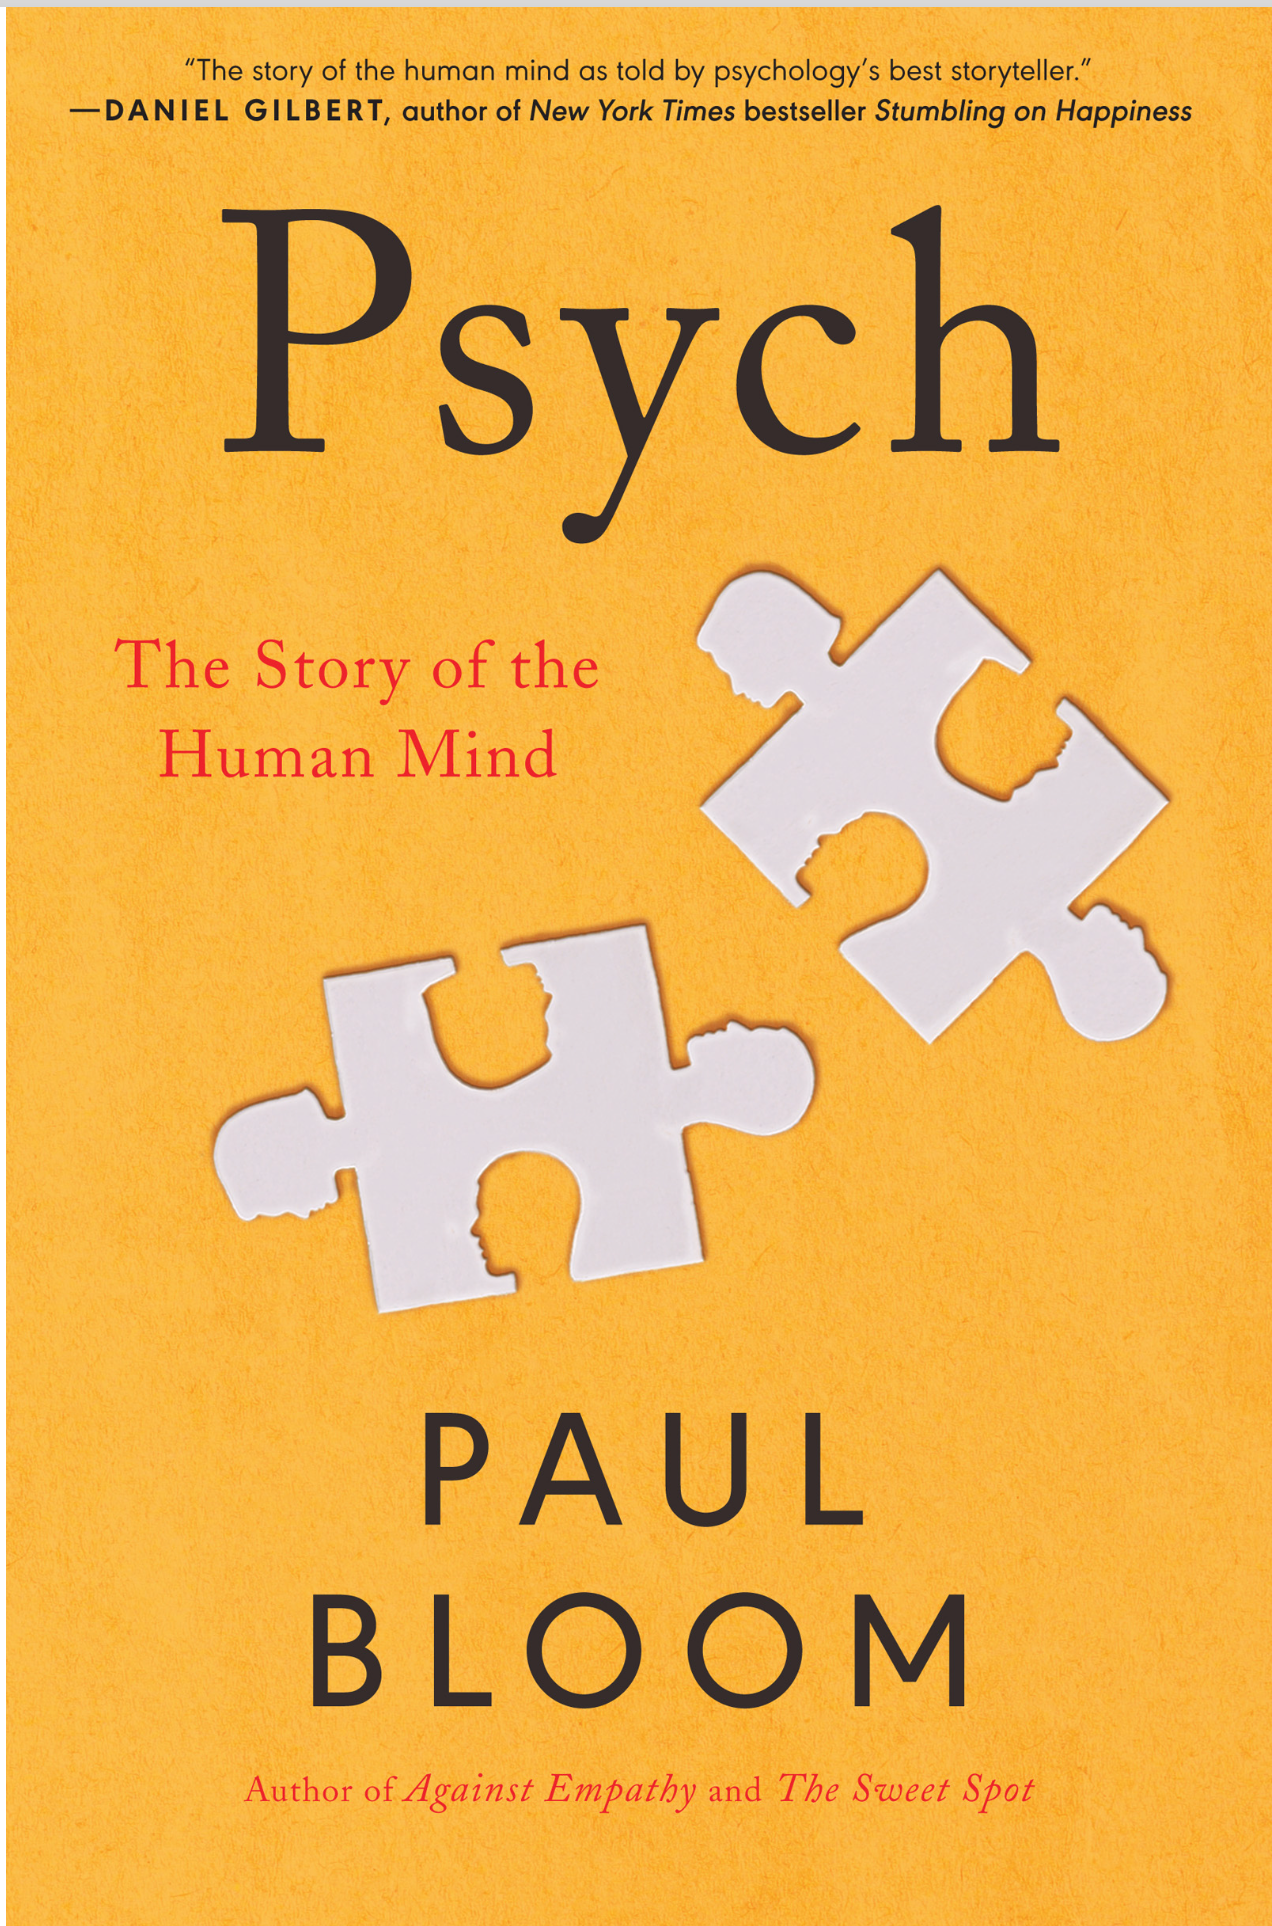 Read more about the article On Paul Bloom’s Psych (2023)